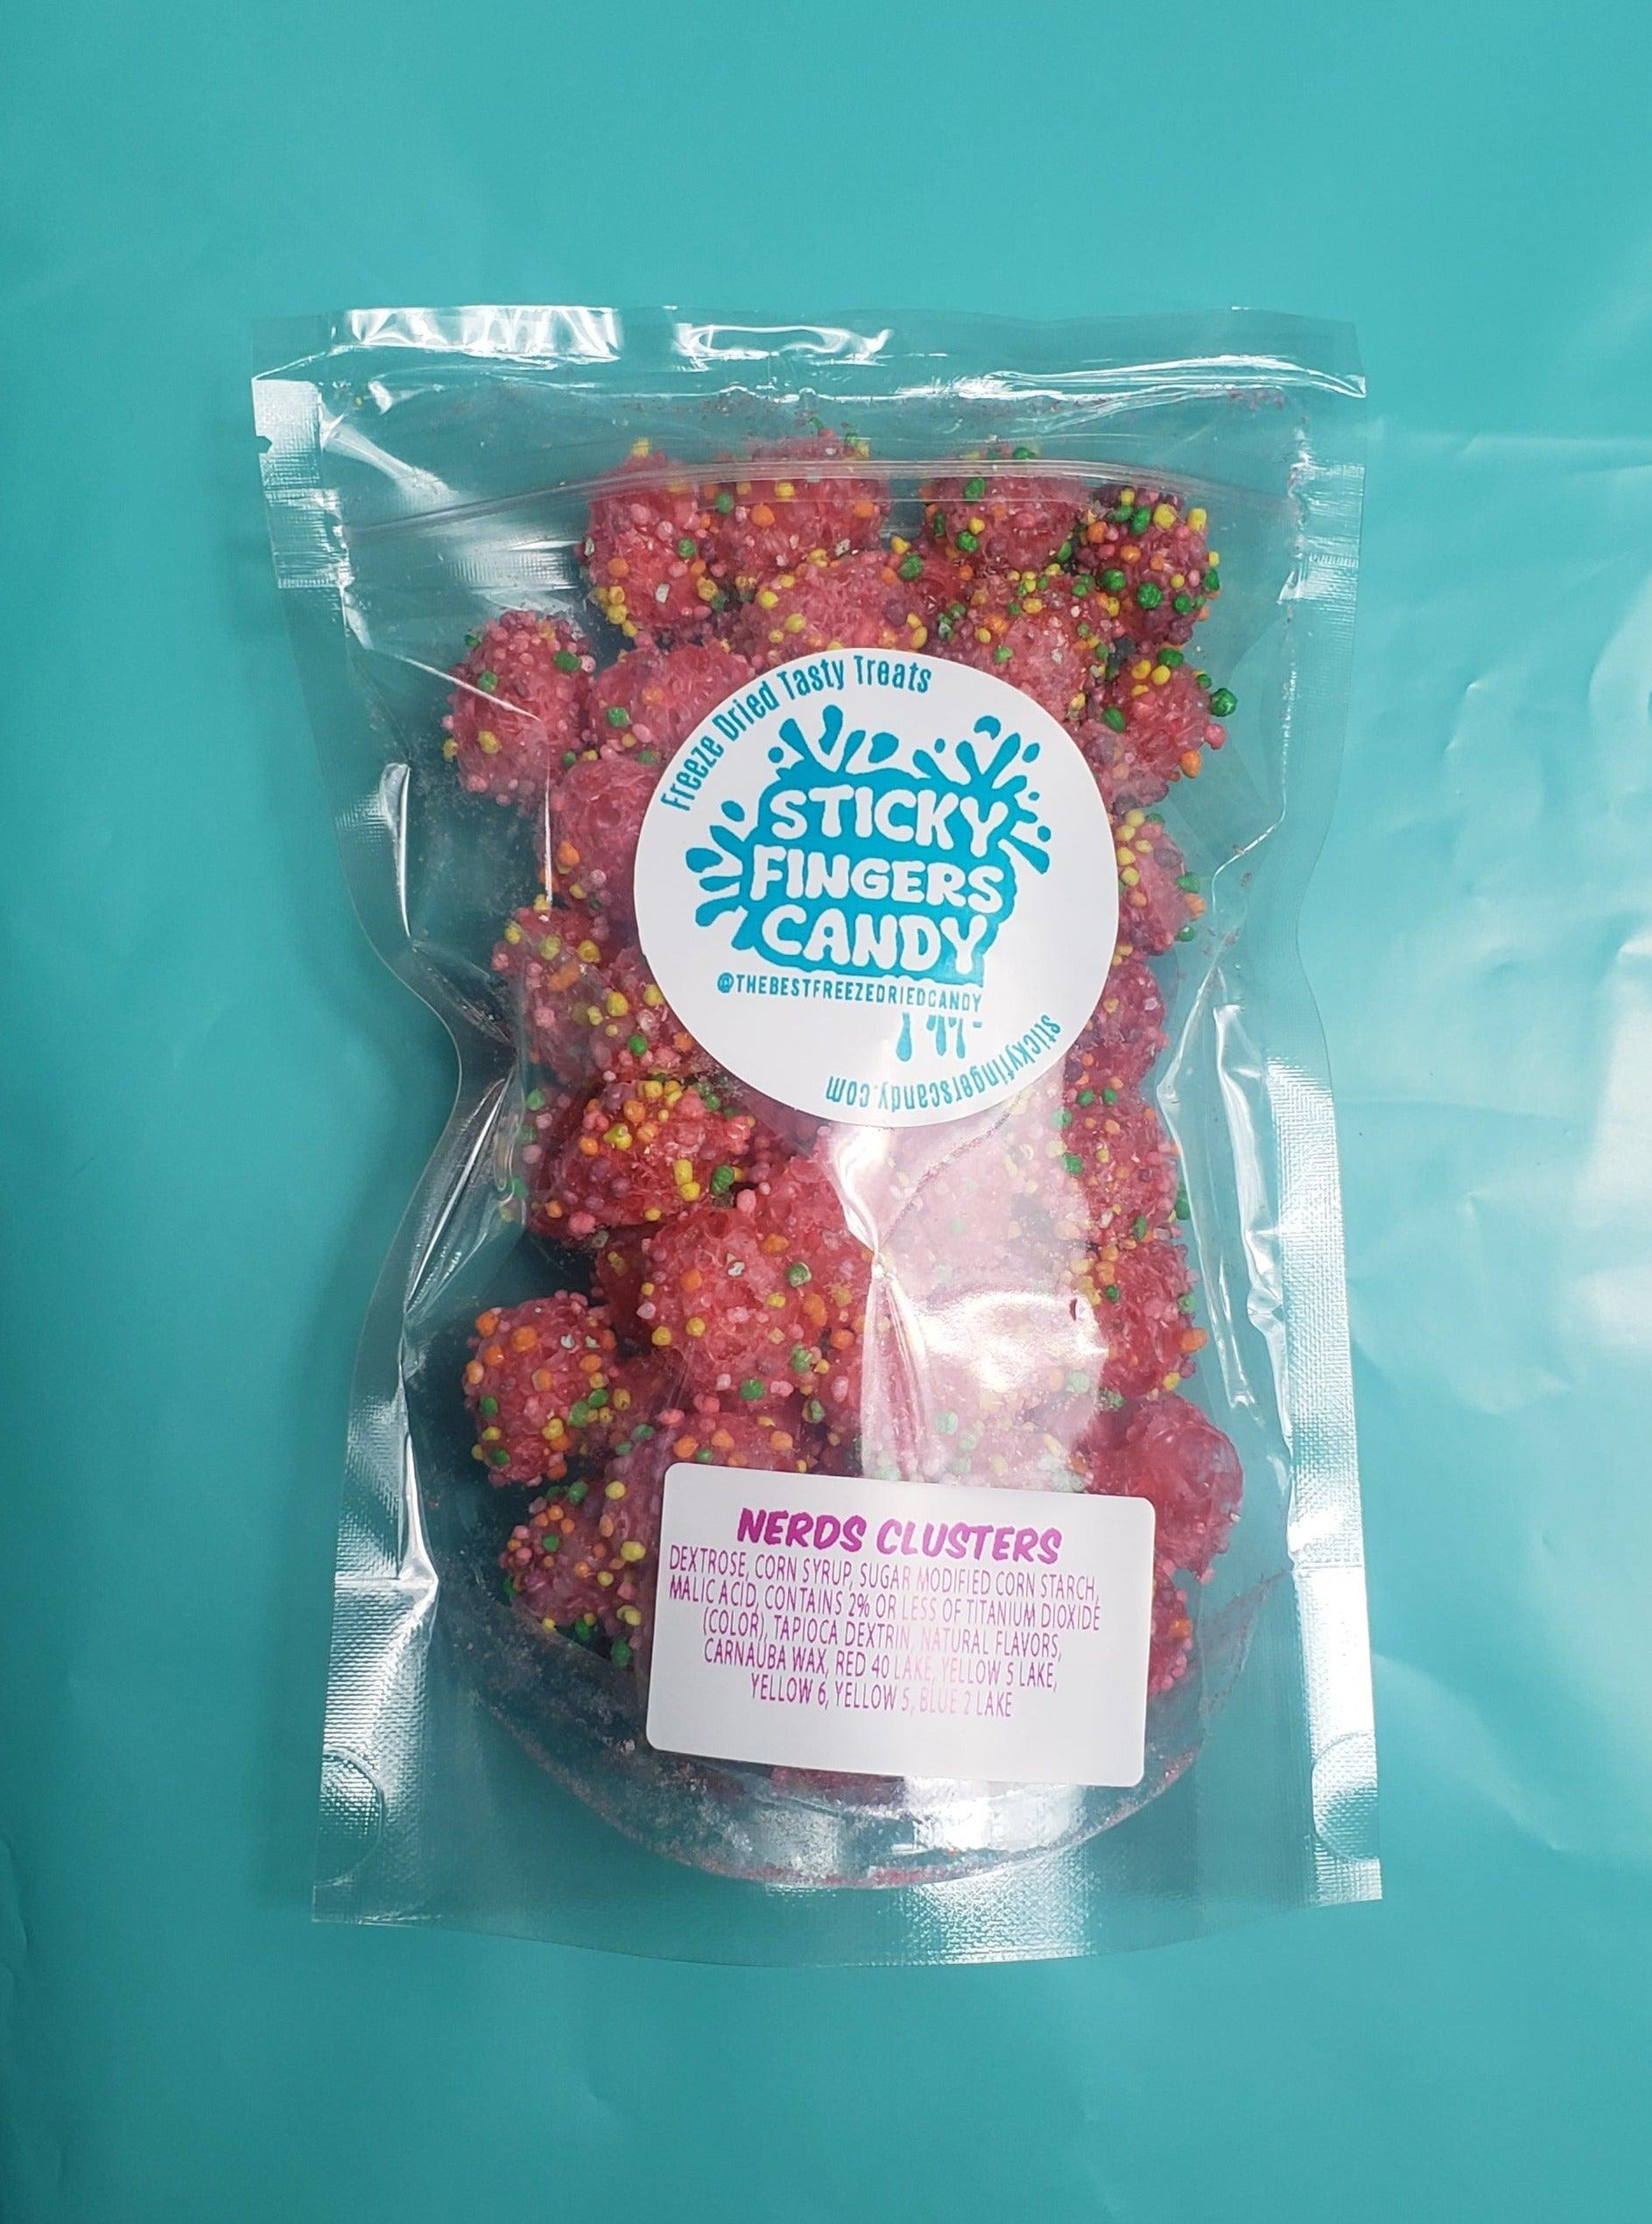 Case Nerds Clusters - Original Flavor - Sticky Fingers Candy - Freeze Dried Tasty Treats